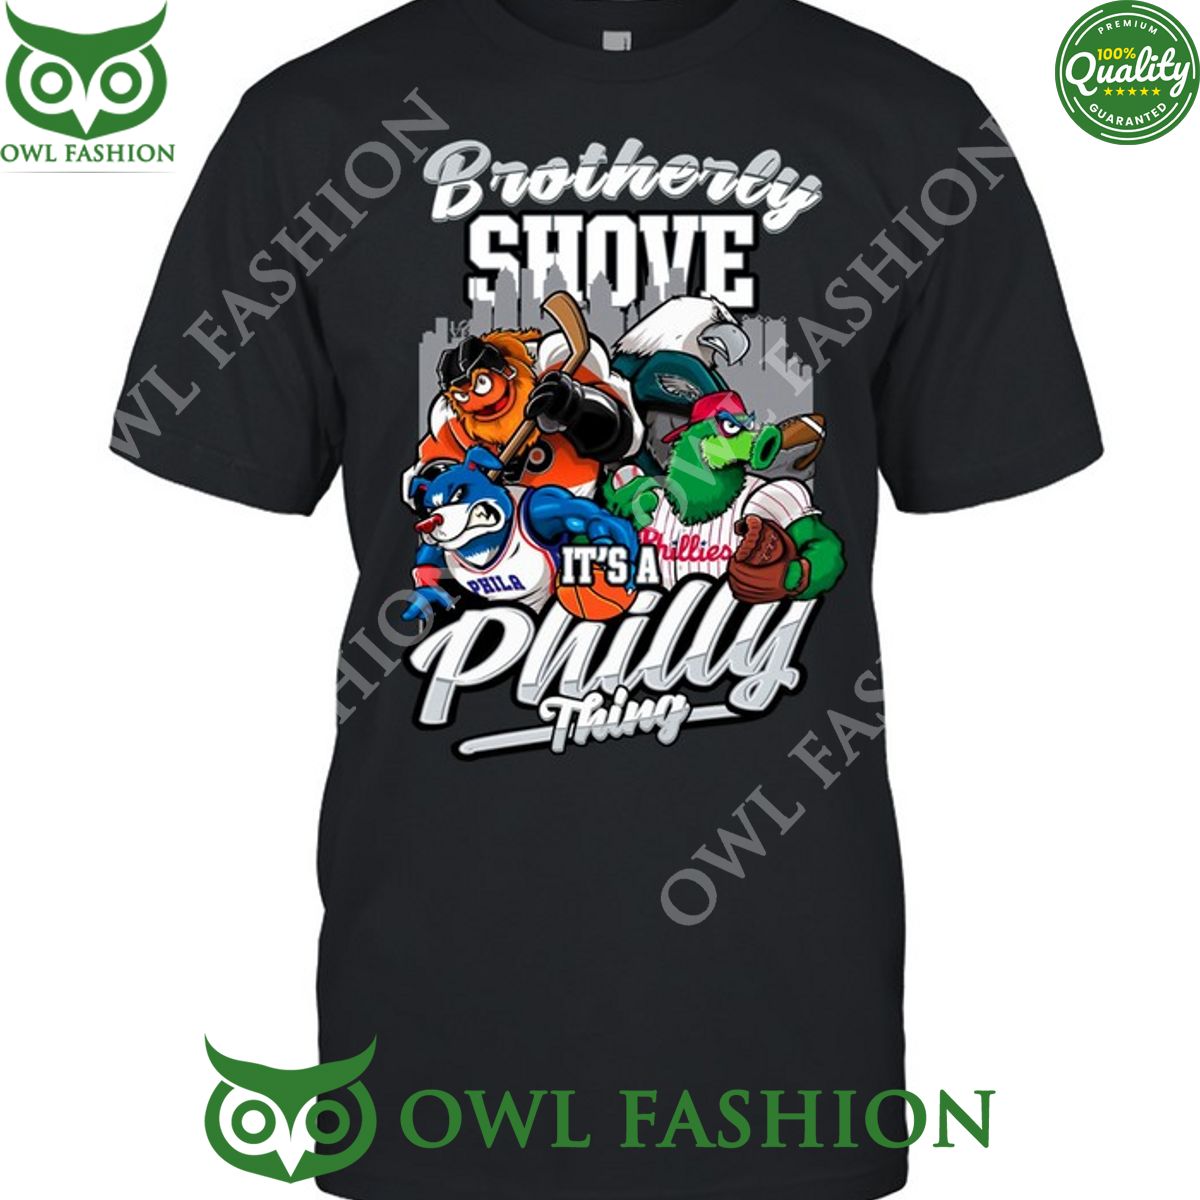 brotherly shove its a philly thing mlb cartoon 2d t shirt 1 zFloY.jpg